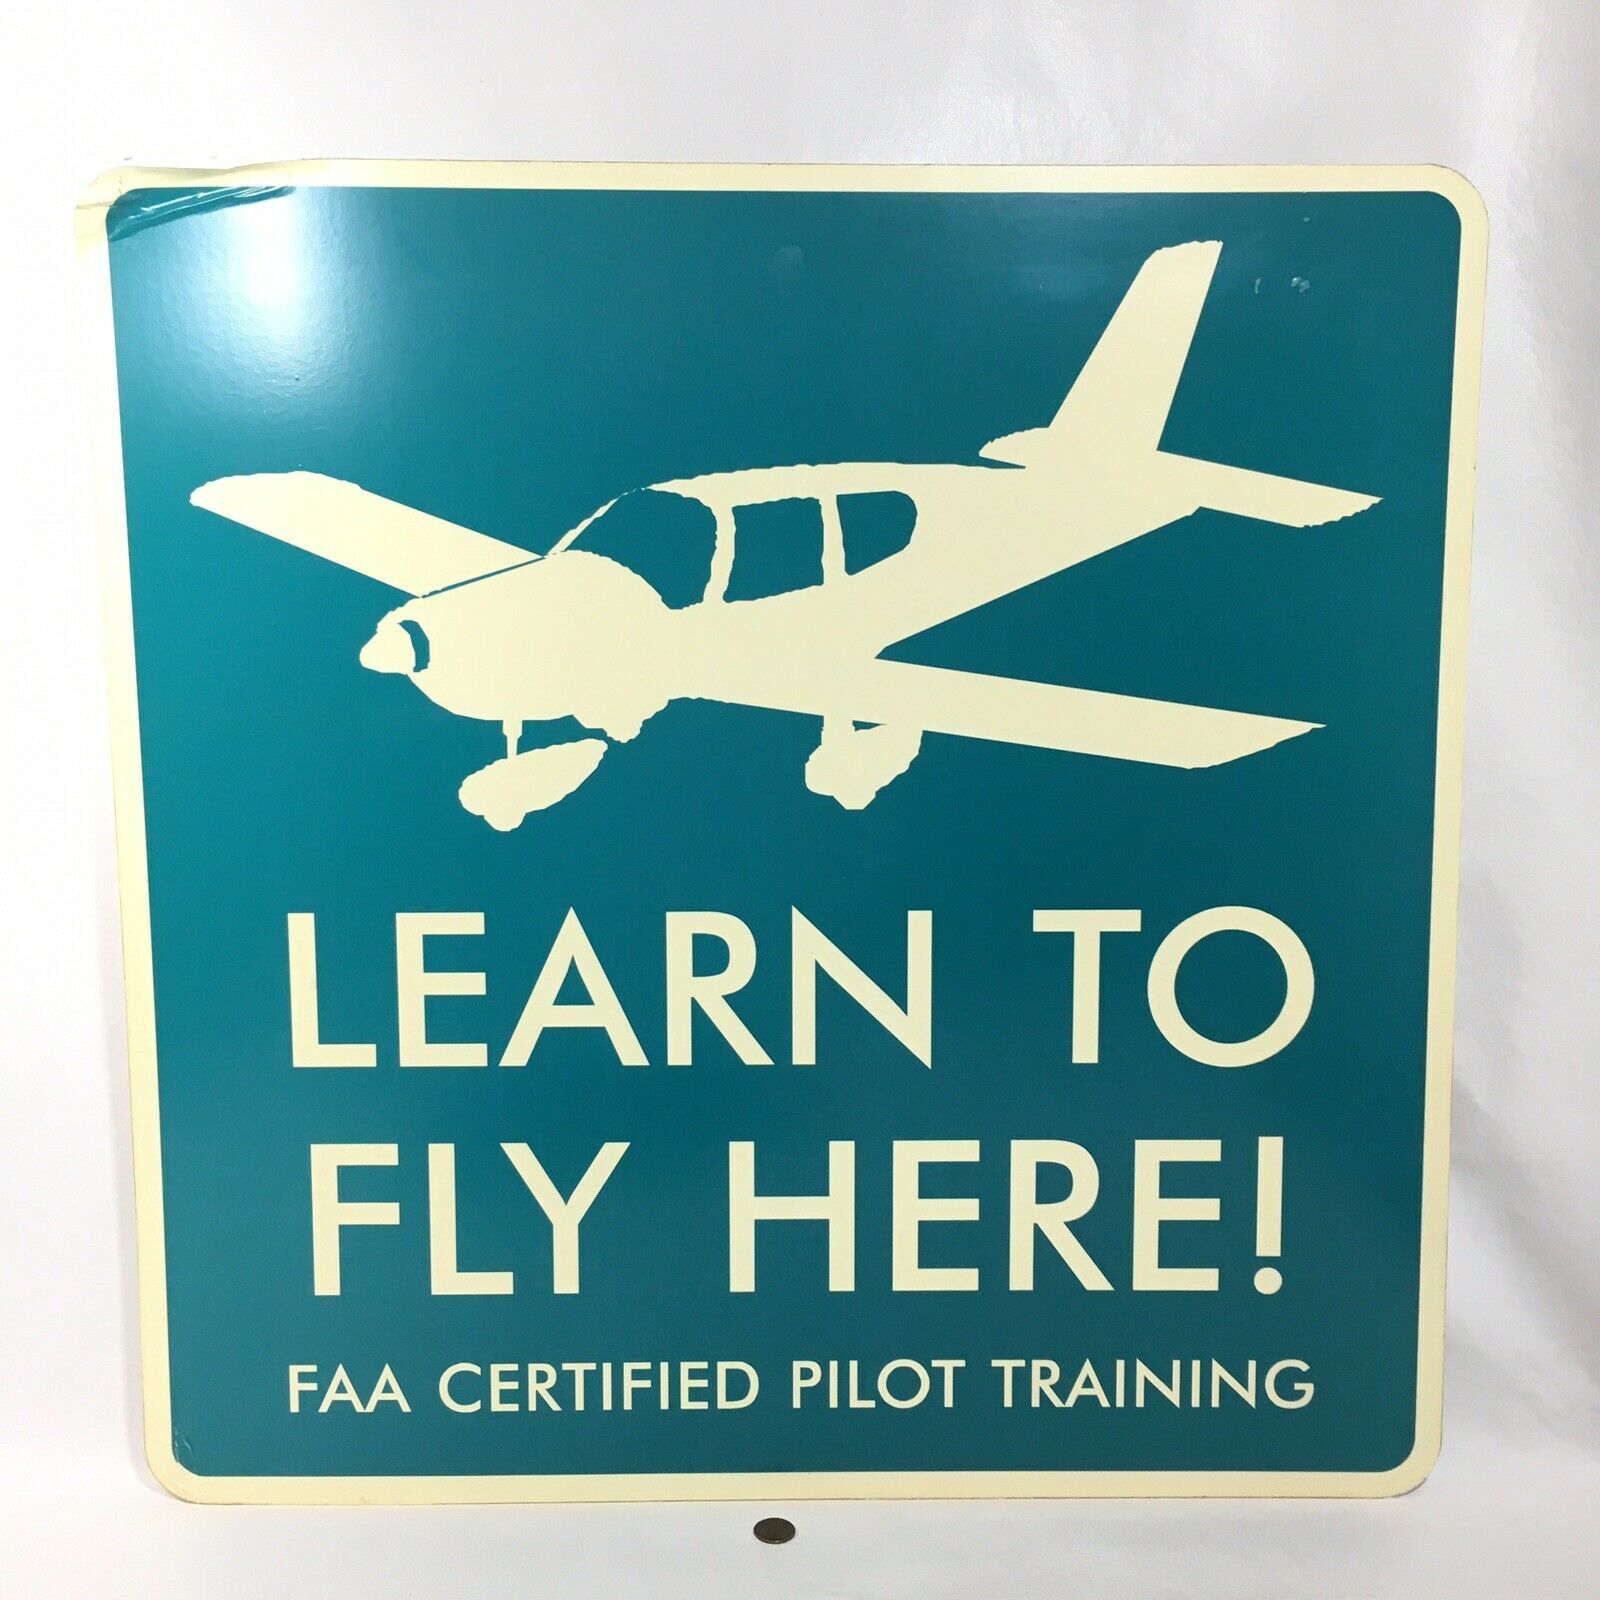 LEARN TO FLY HERE! FAA Certified Pilot Training Plastic 24" SIGN Ad Airplane